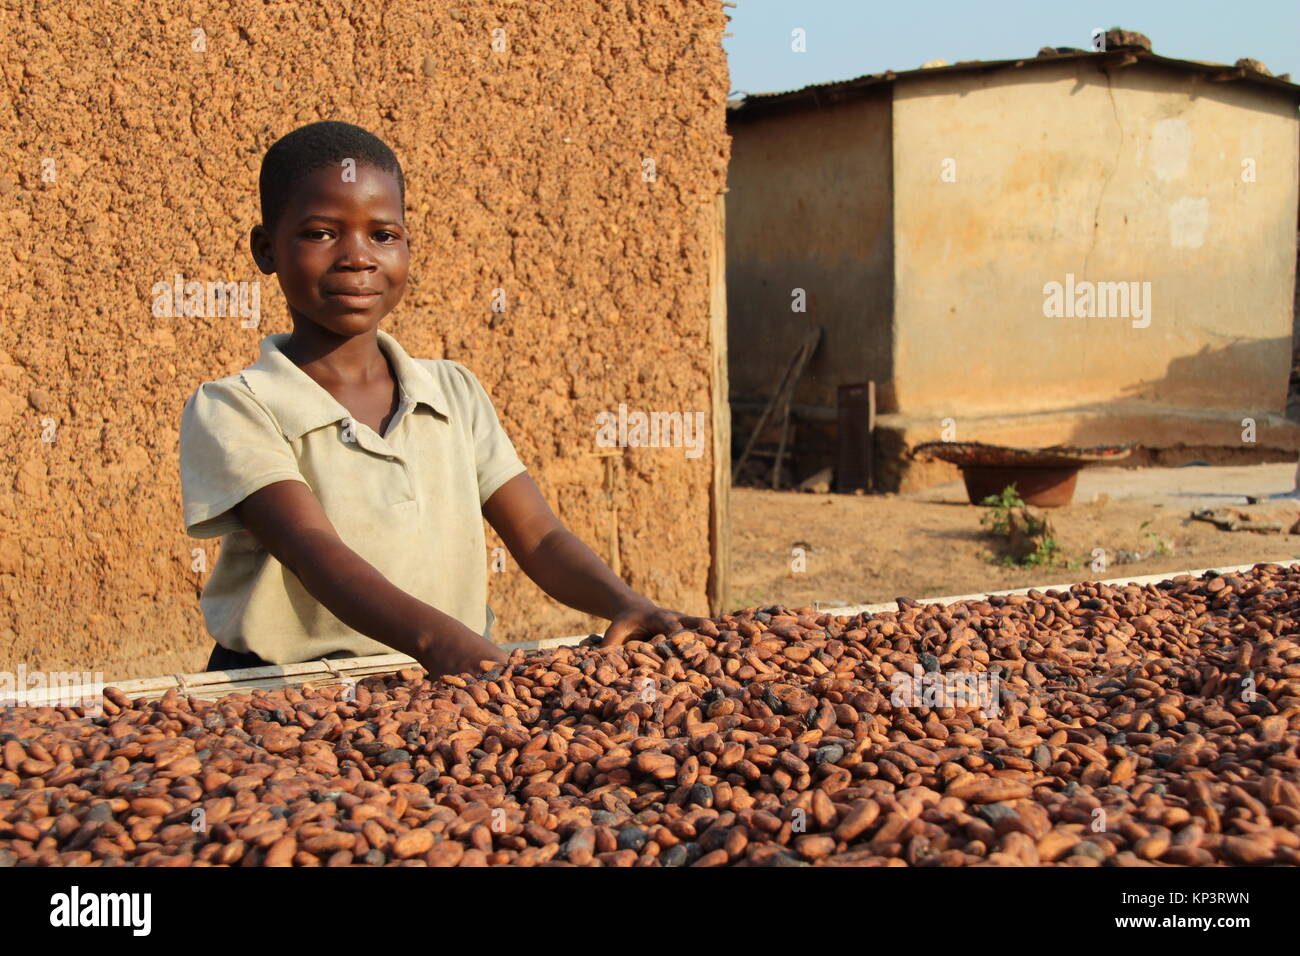 Nine-year-old Moahe helps drying the cocoa beans that were harvested shortly before in th esun in the village Konan Yaokro, Ivory Coast, 1 December 2017. Most chocolate in Germany comes from Weste Africa, where more and more children work in the cocoa plantations. Photo: Jürgen Bätz/dpa Stock Photo